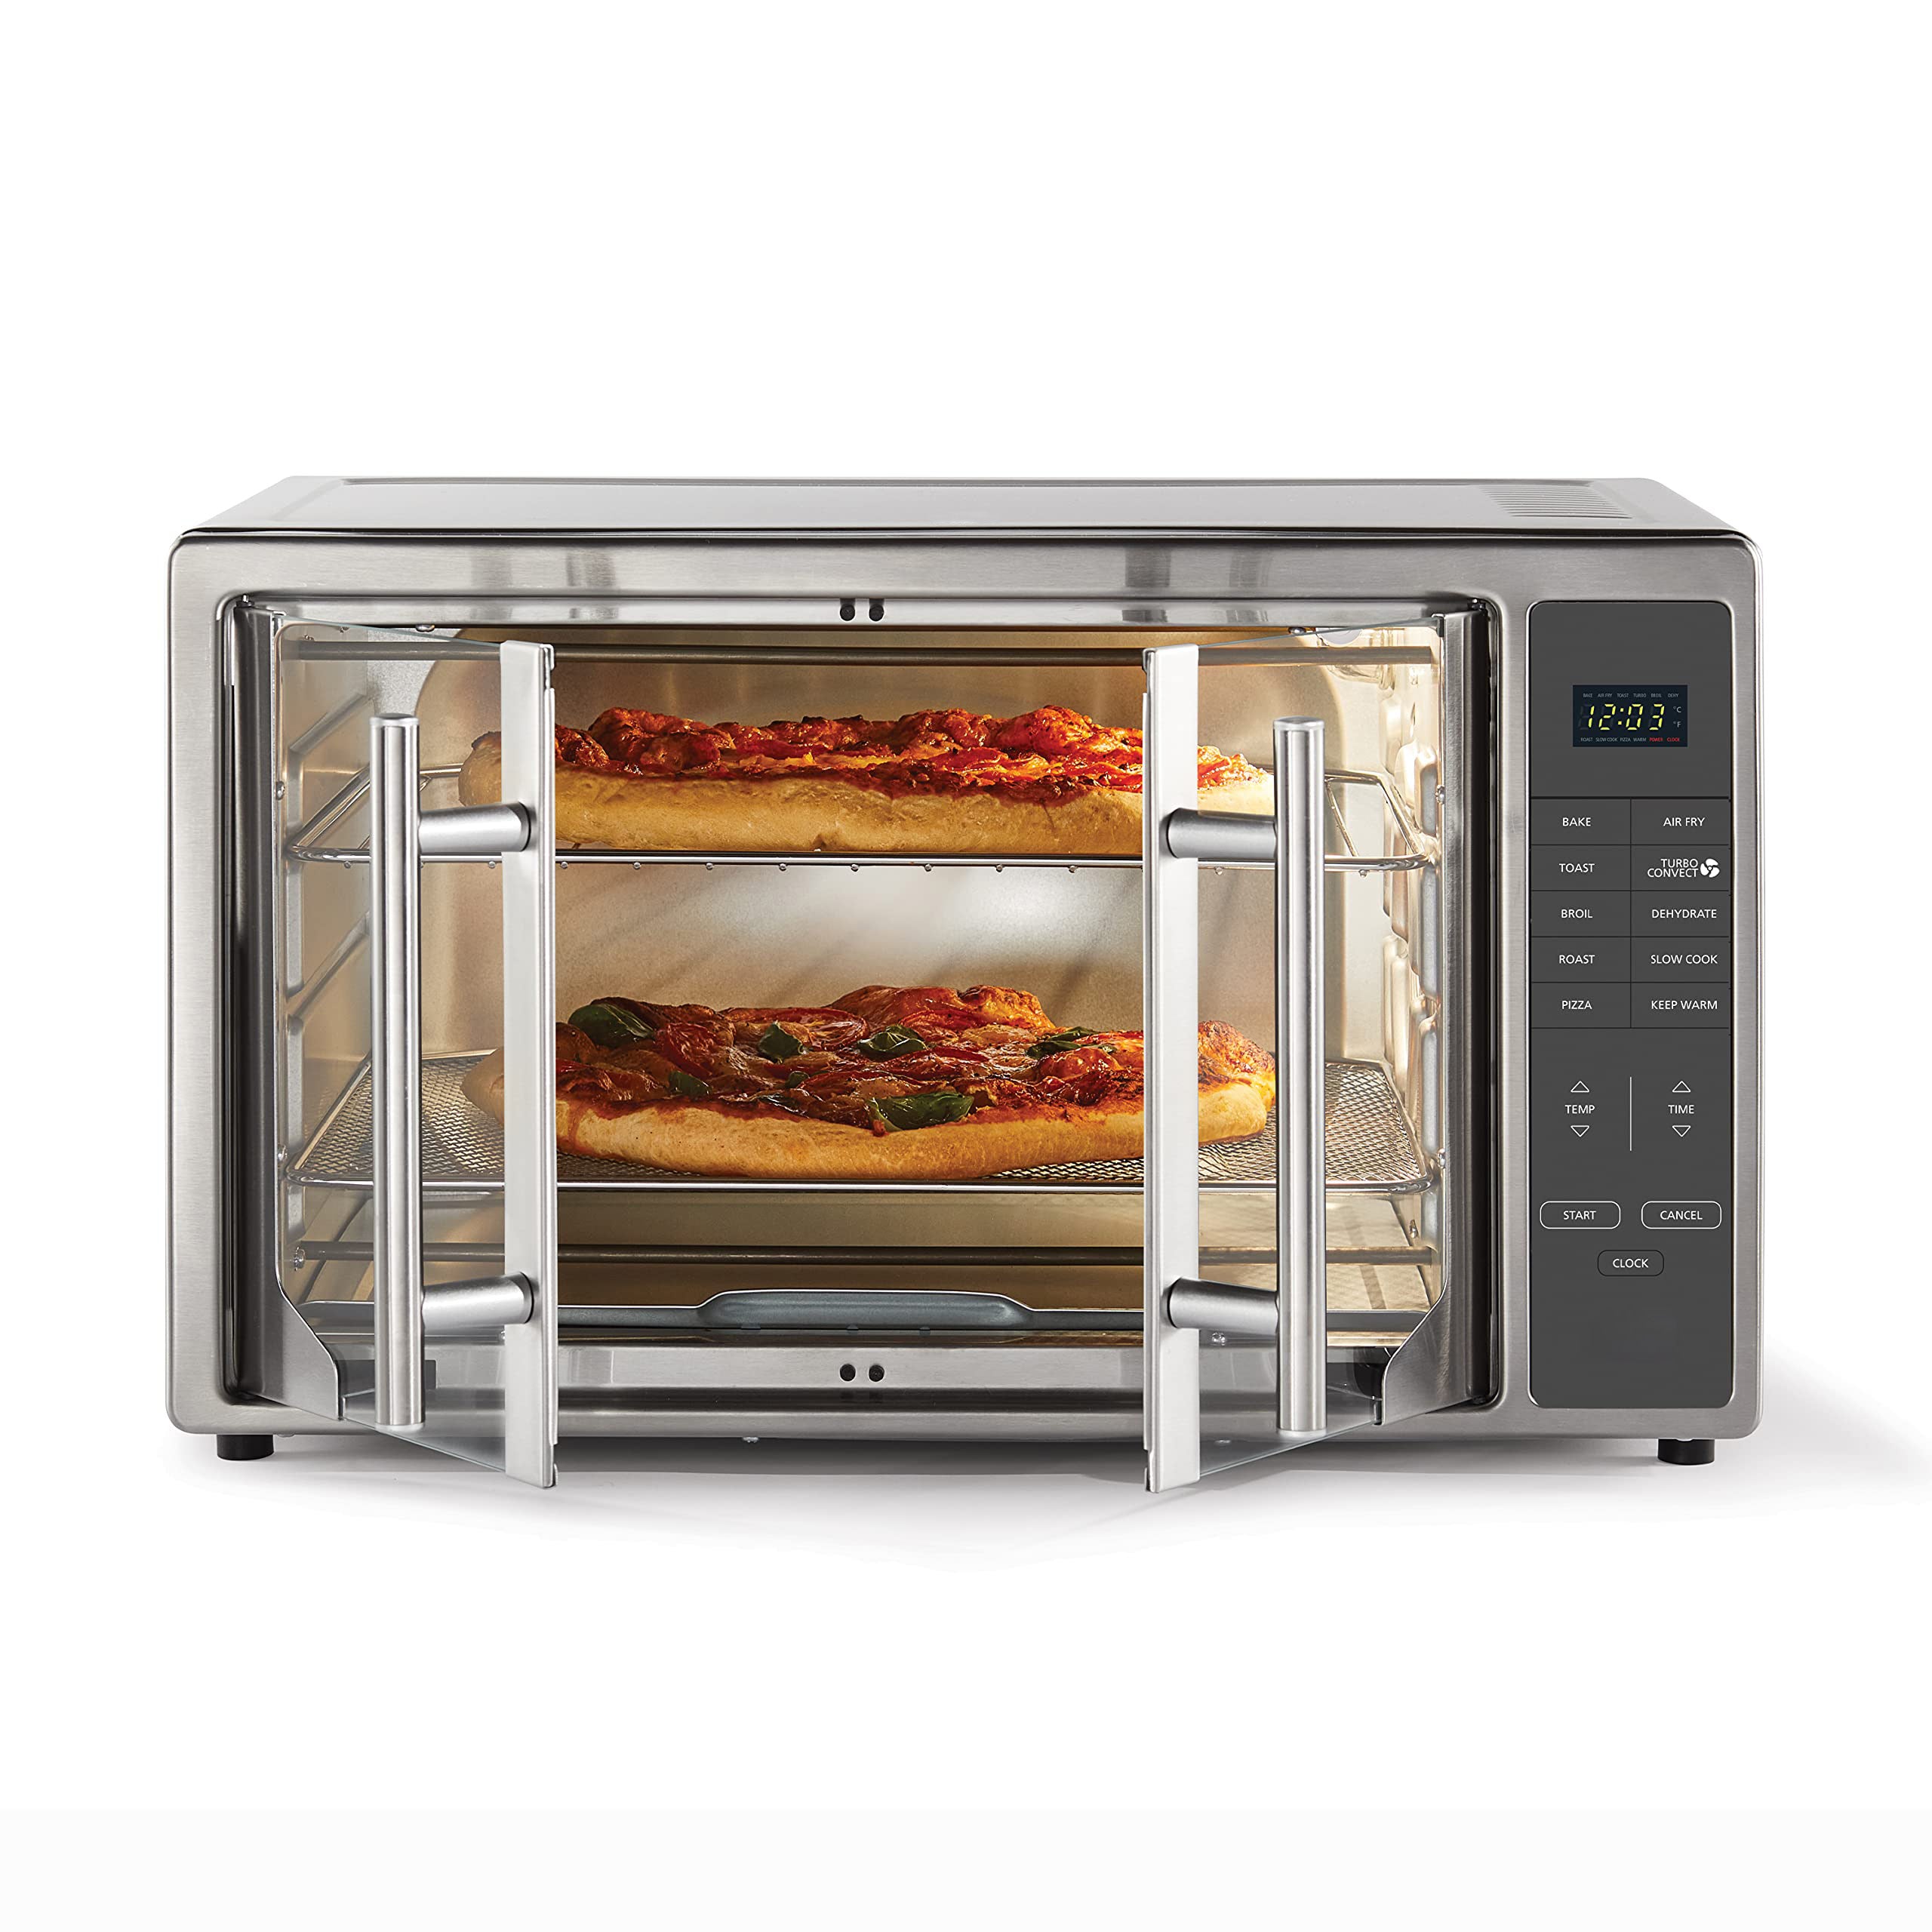 10-in-1 Countertop Toaster Oven Fits 16" Pizzas with Stainless Steel French Doors